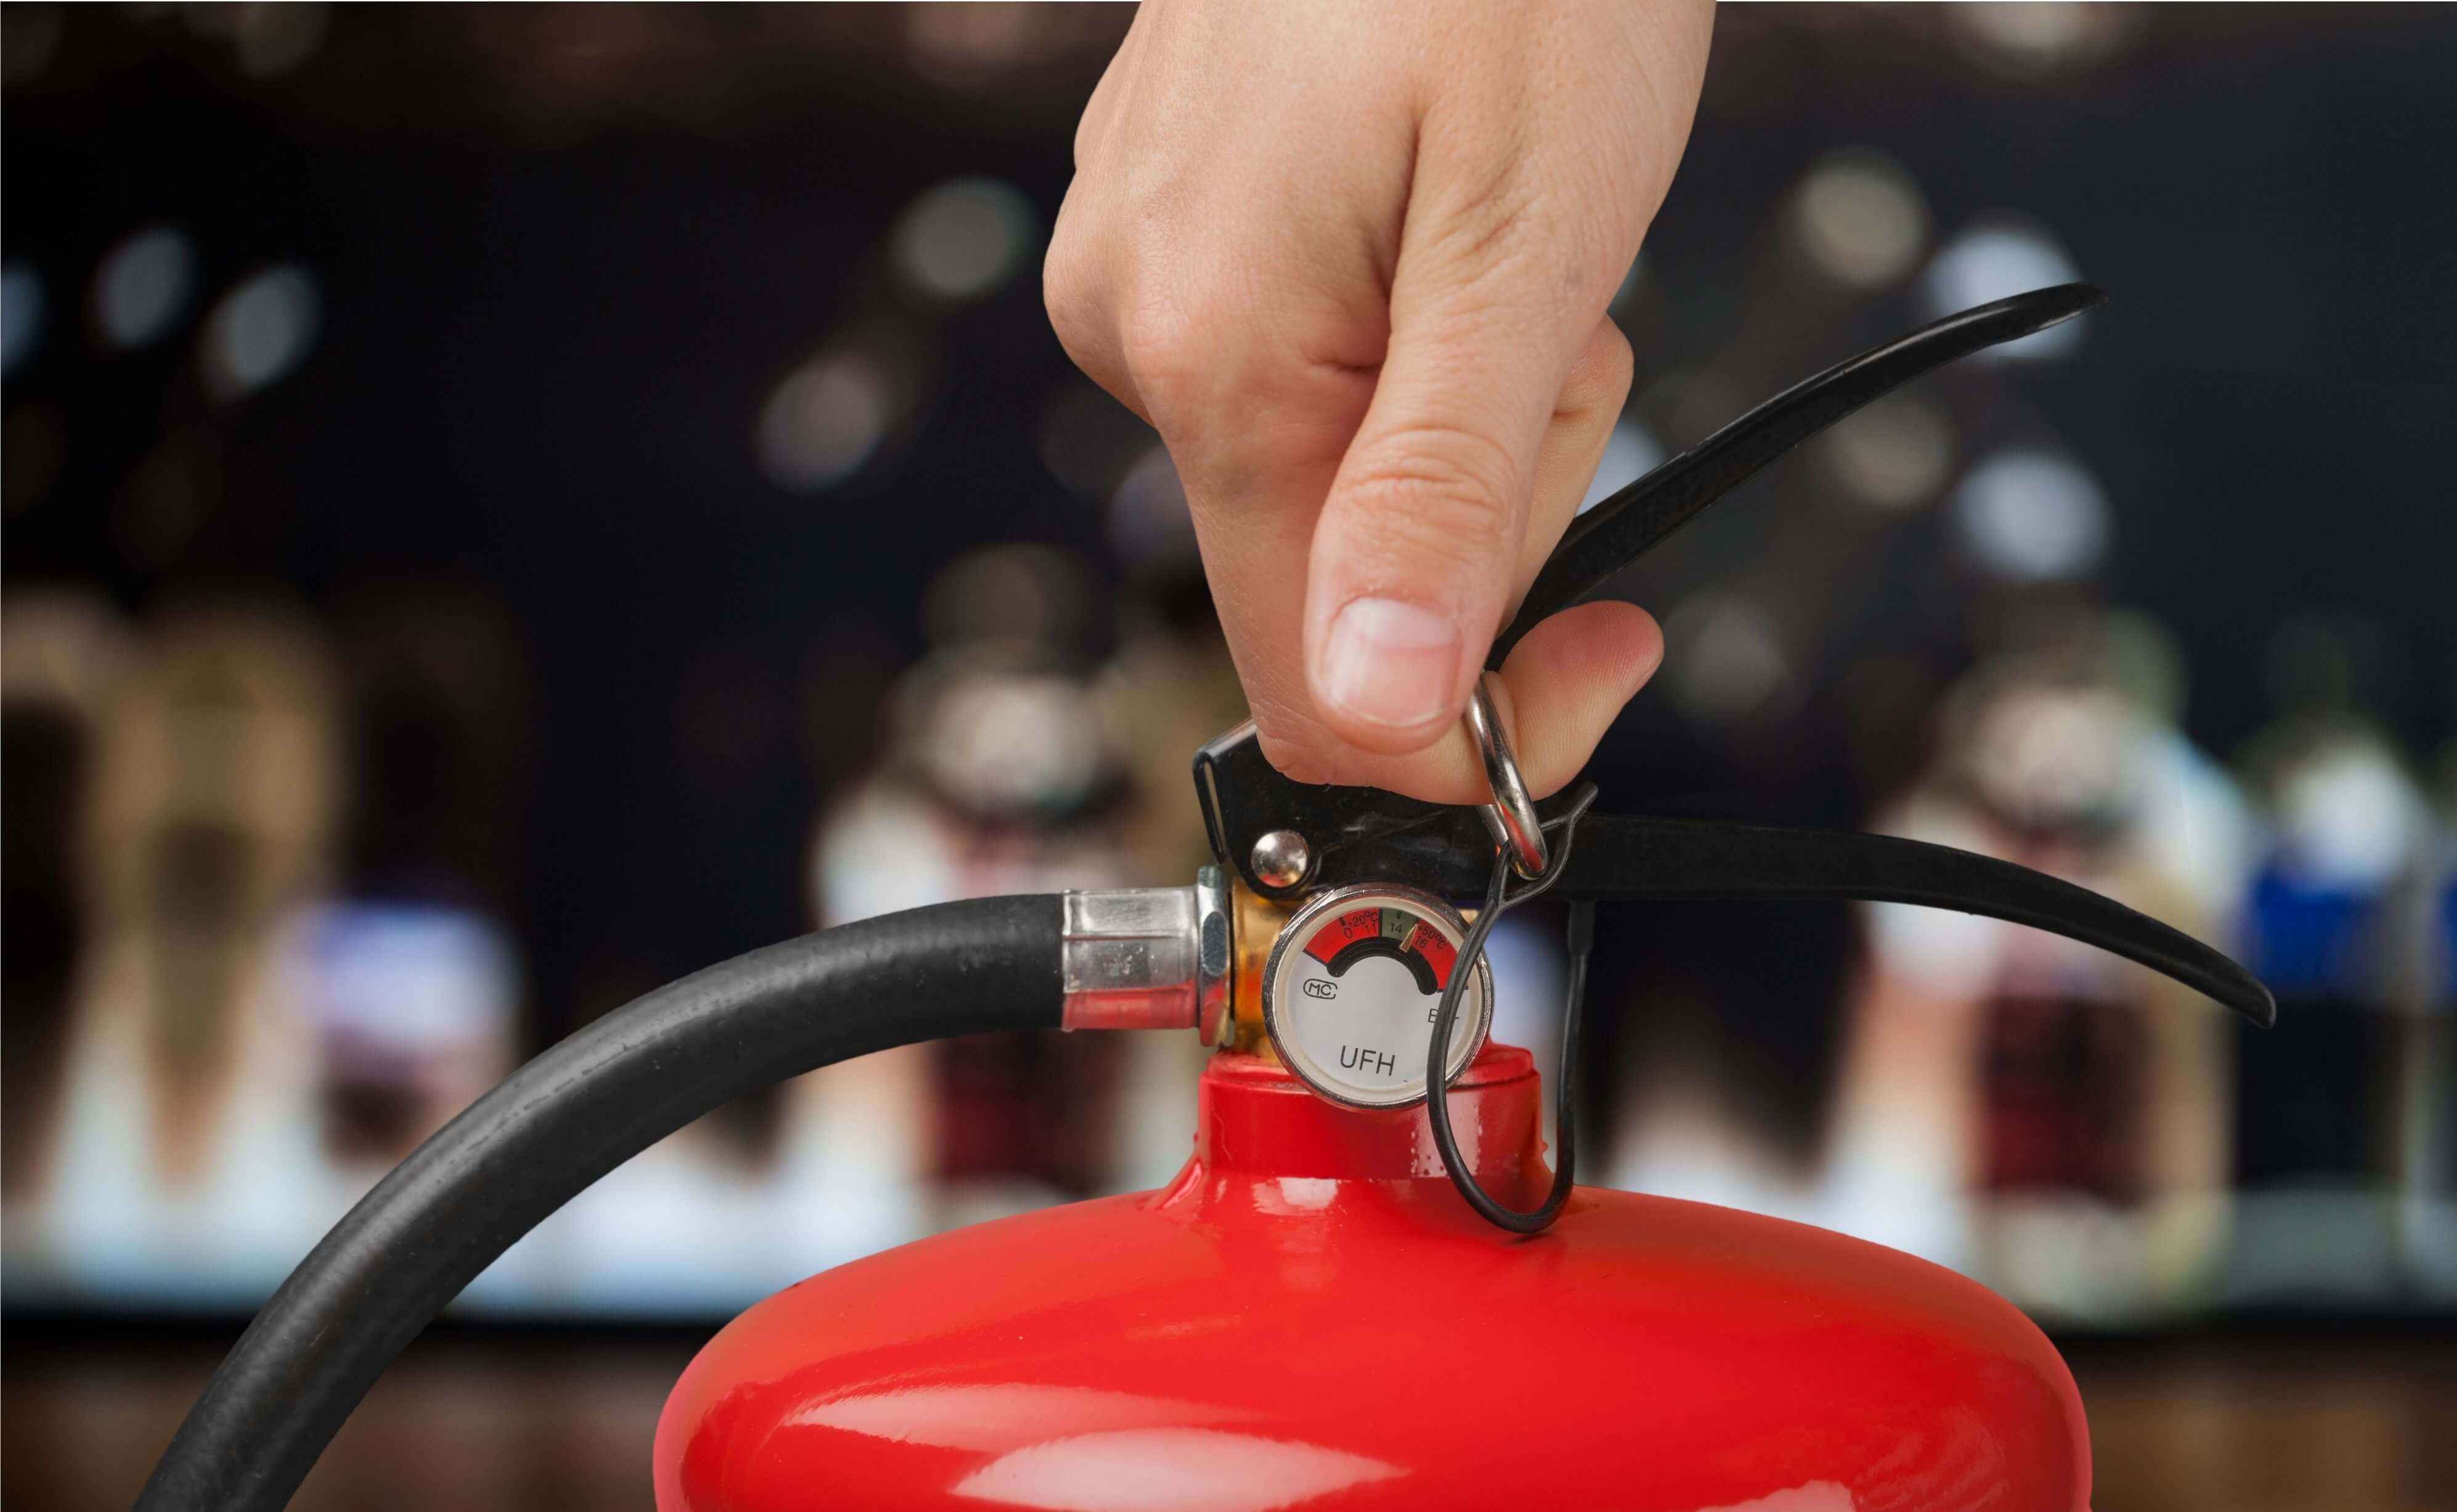 Get the high-quality fire suppression system you need